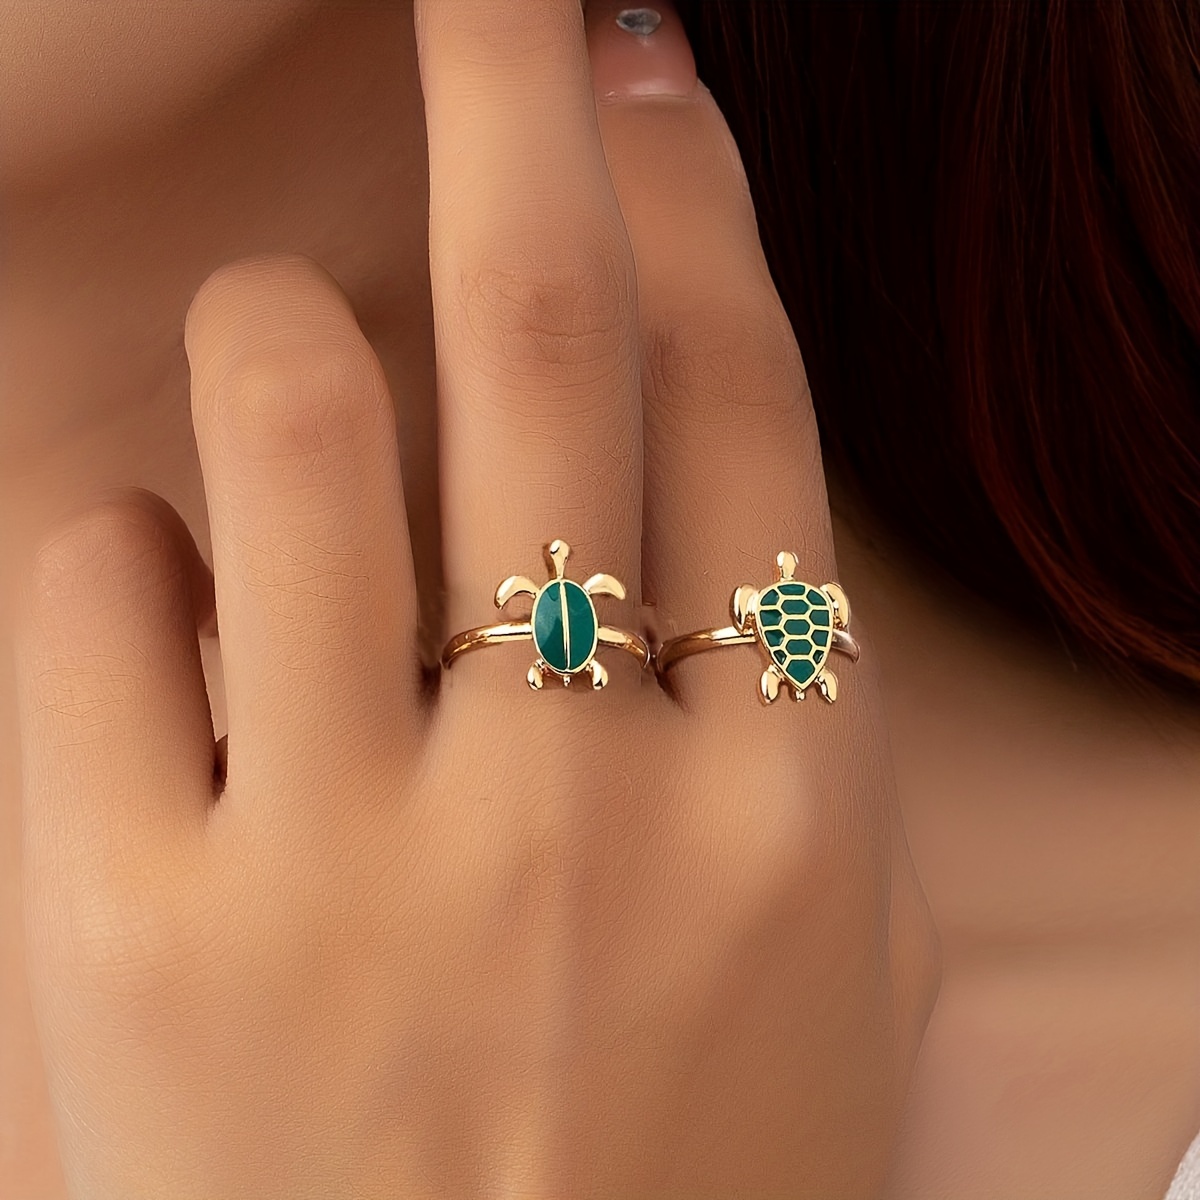 

2pcs Cute Stacking Rings 14k Plated Lovely Turtle Design Match Daily Outfits Perfect Decor For Summer Vacation Unusual Jewelry For Men And Women